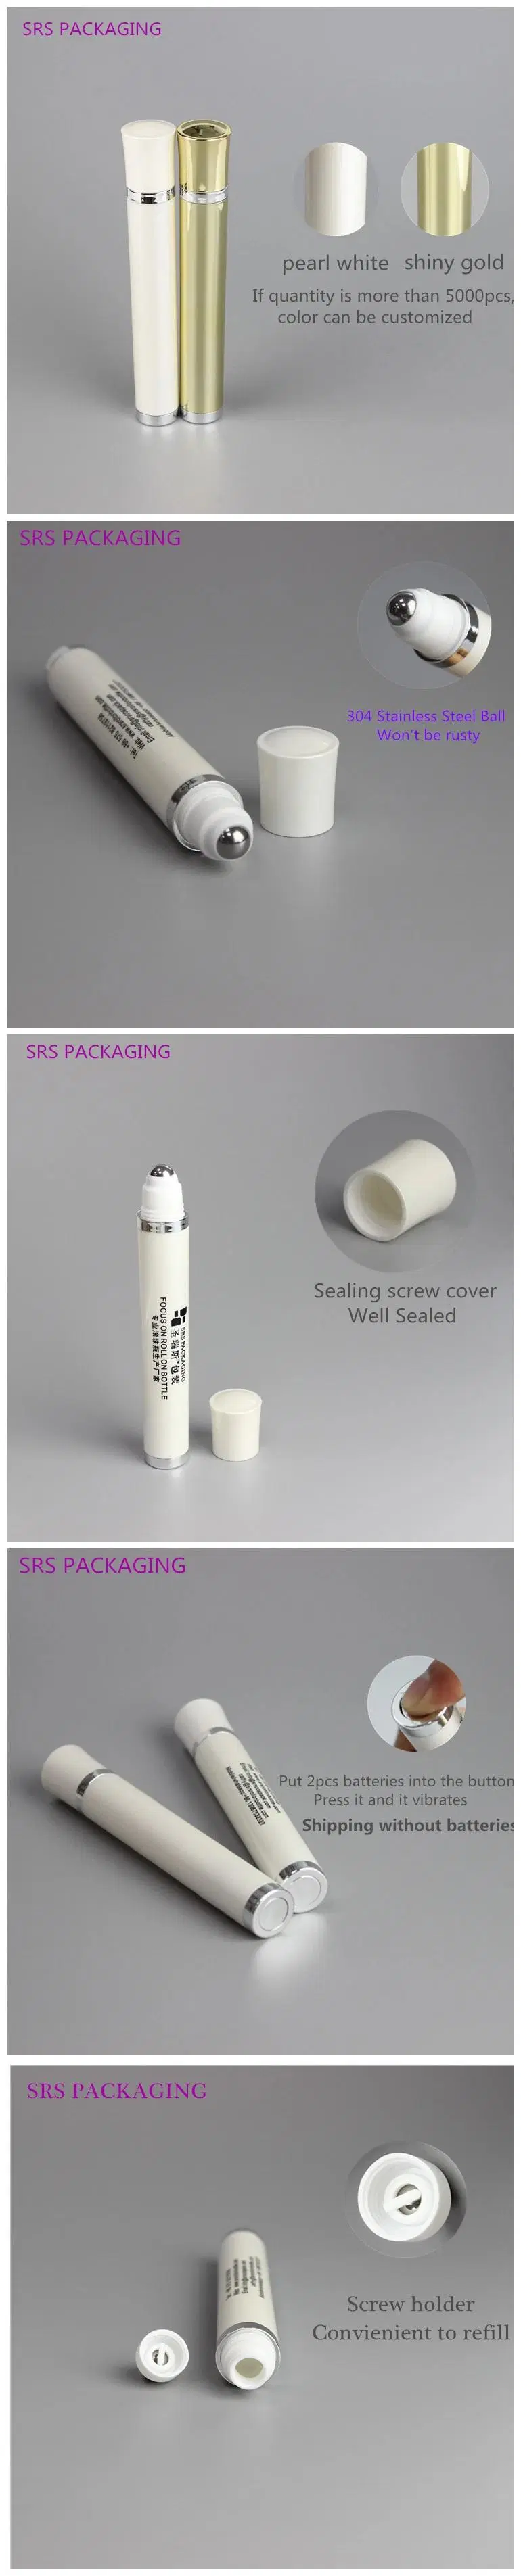 factory direct sale 10ml 30ml Electronic Vibrating Roll on Bottle with stainless steel roller ball For eye cream